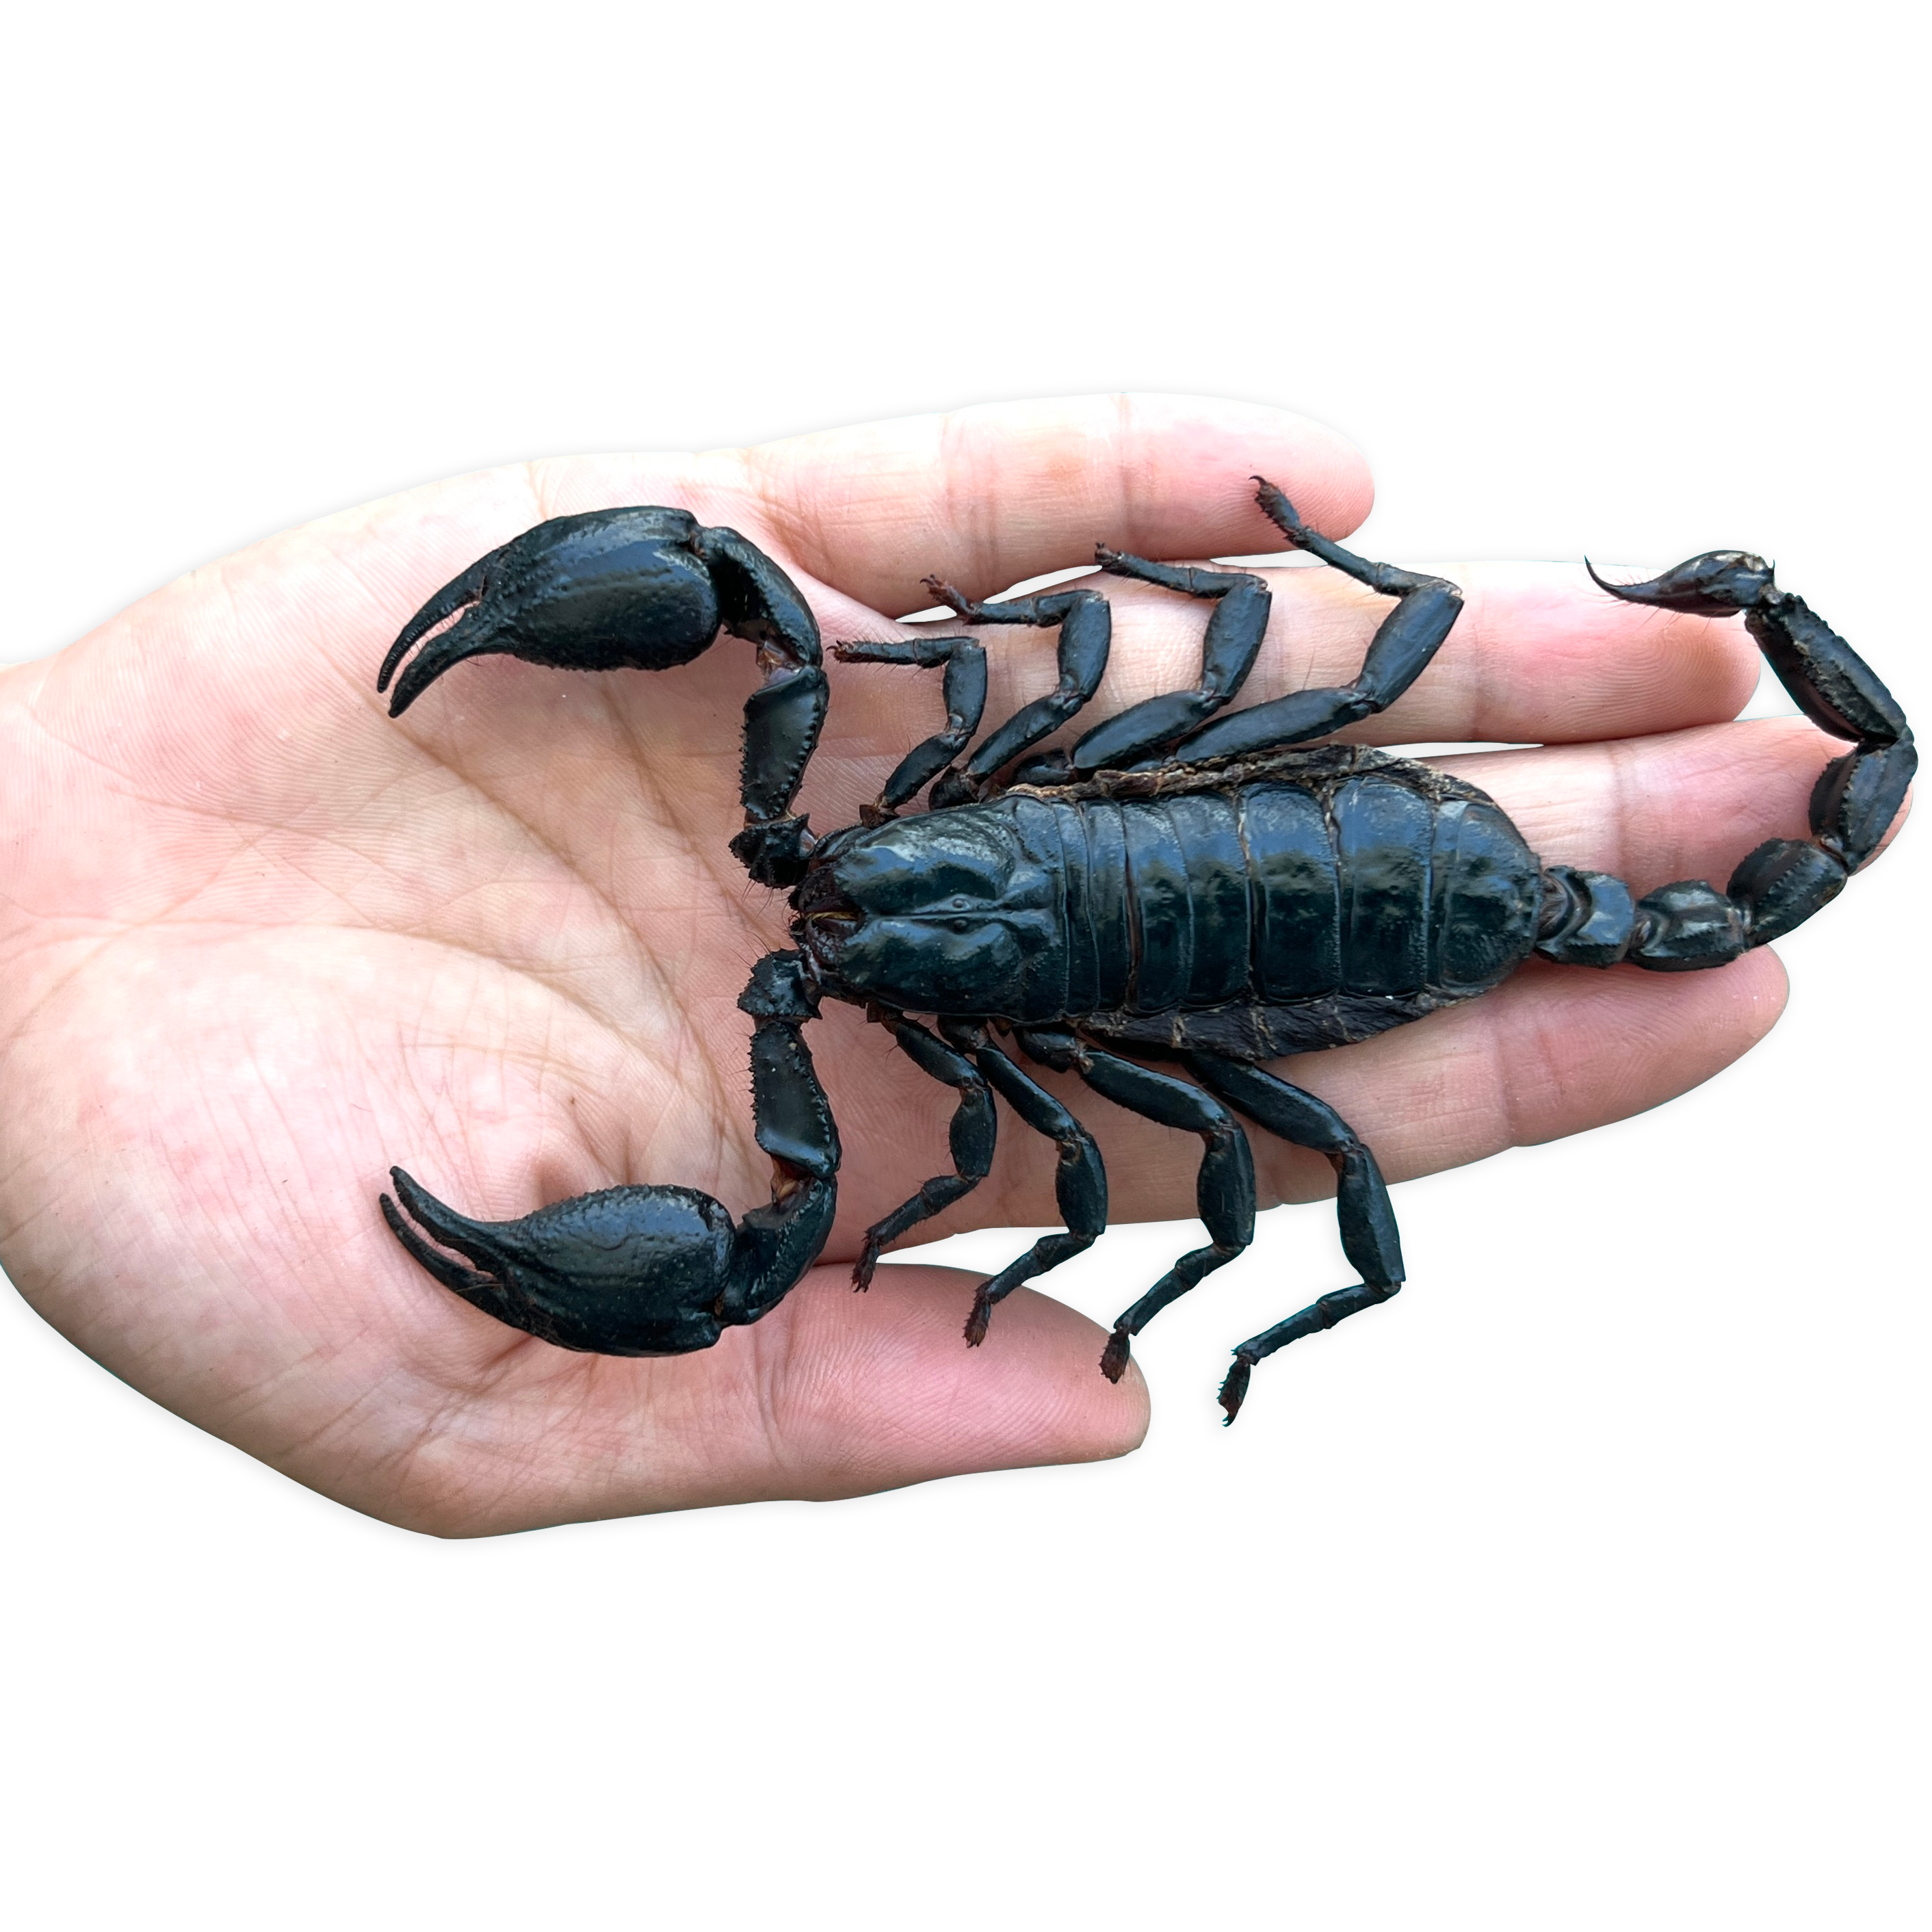 Scorpion Real Wooden Framed Dried Insect Taxidermy Bug K16-51-DE